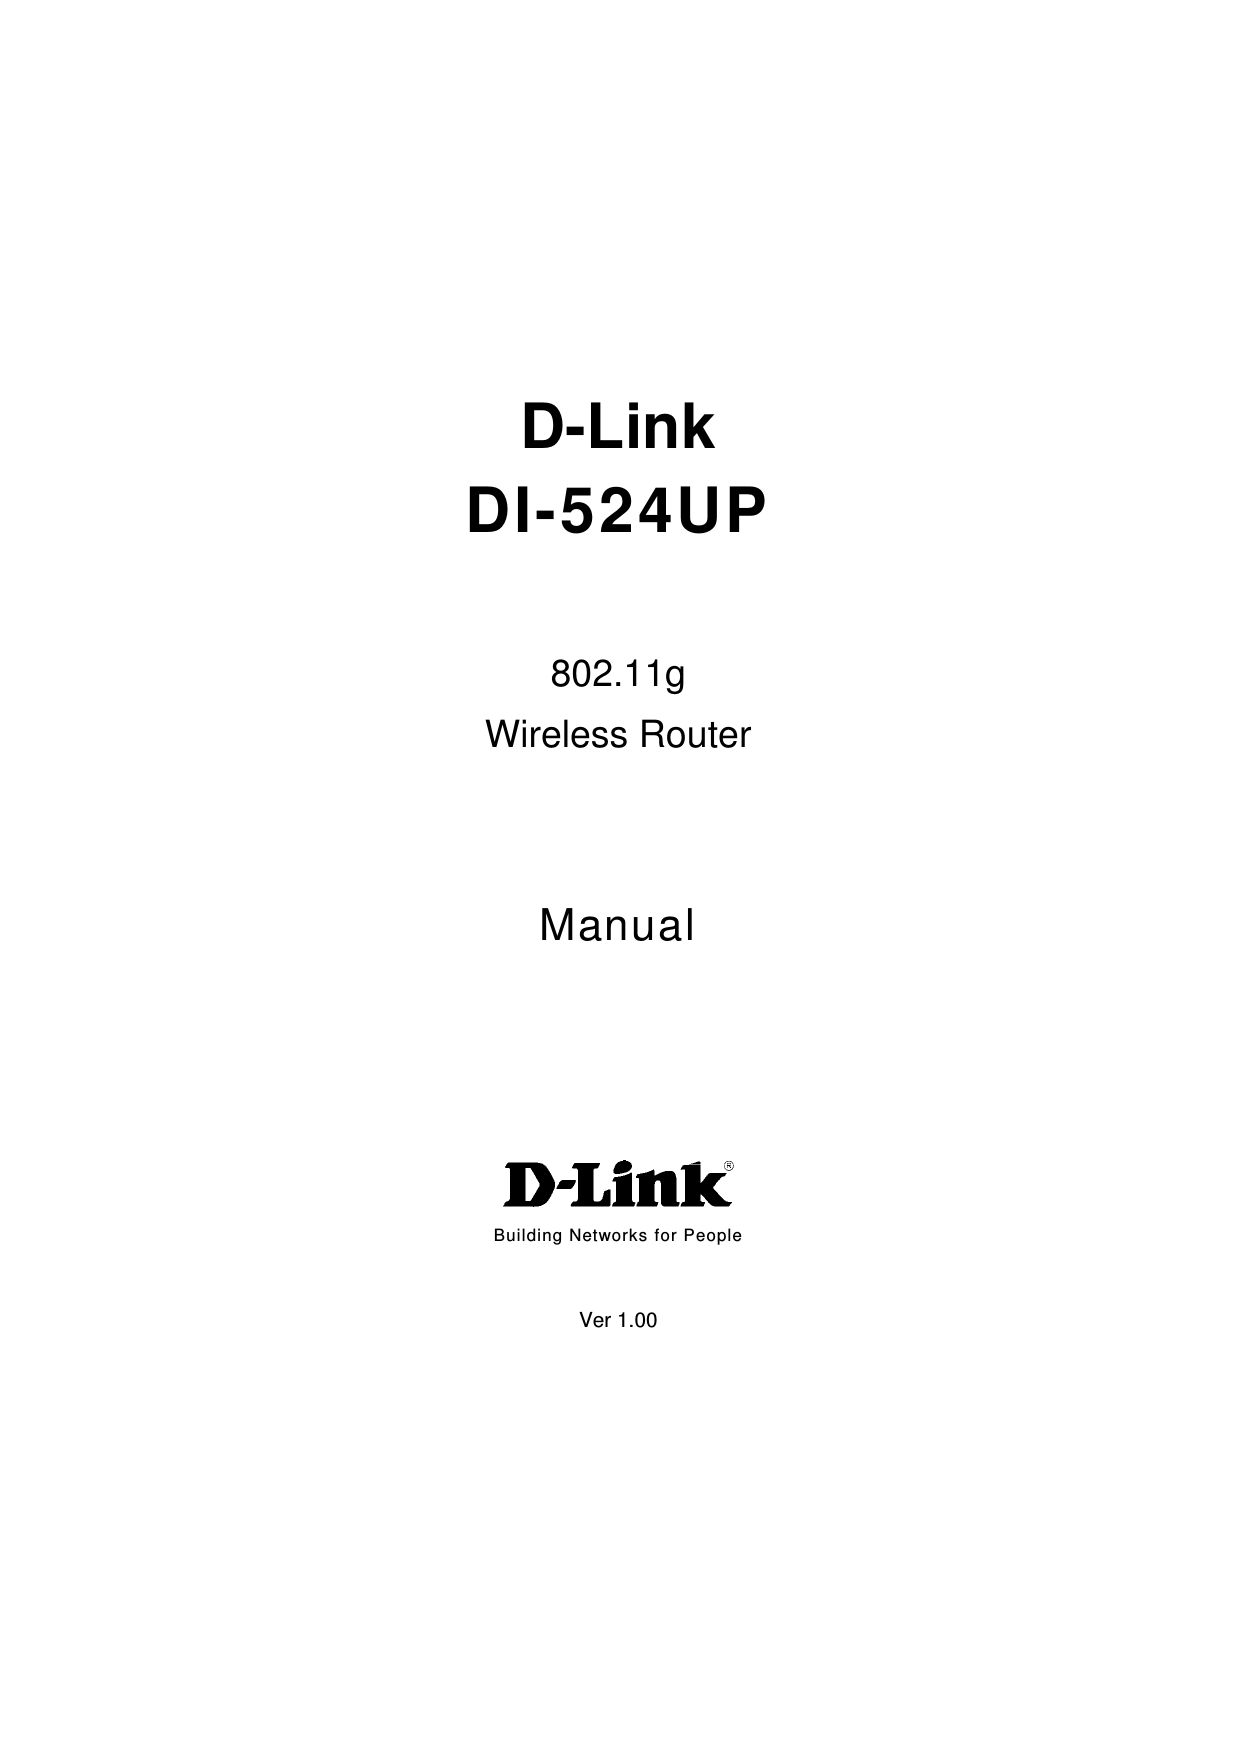 D-LinkDI-524UP802.11gWireless RouterManualBuilding Networks for PeopleVer 1.00